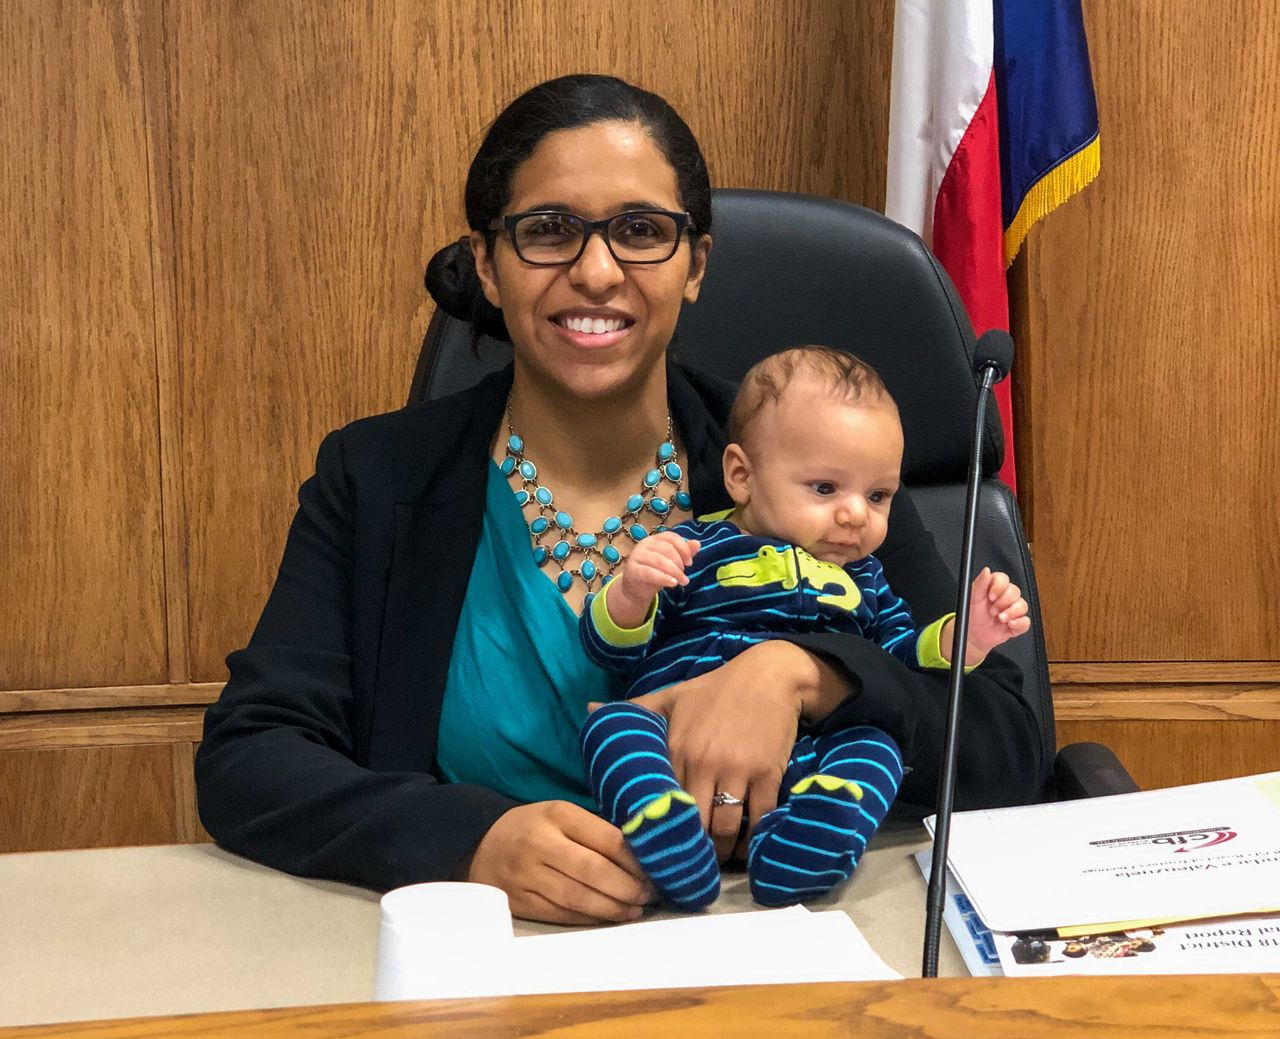 Valenzuela at a Carrollton-Farmers Branch school board meeting in August 2019 with her baby boy.